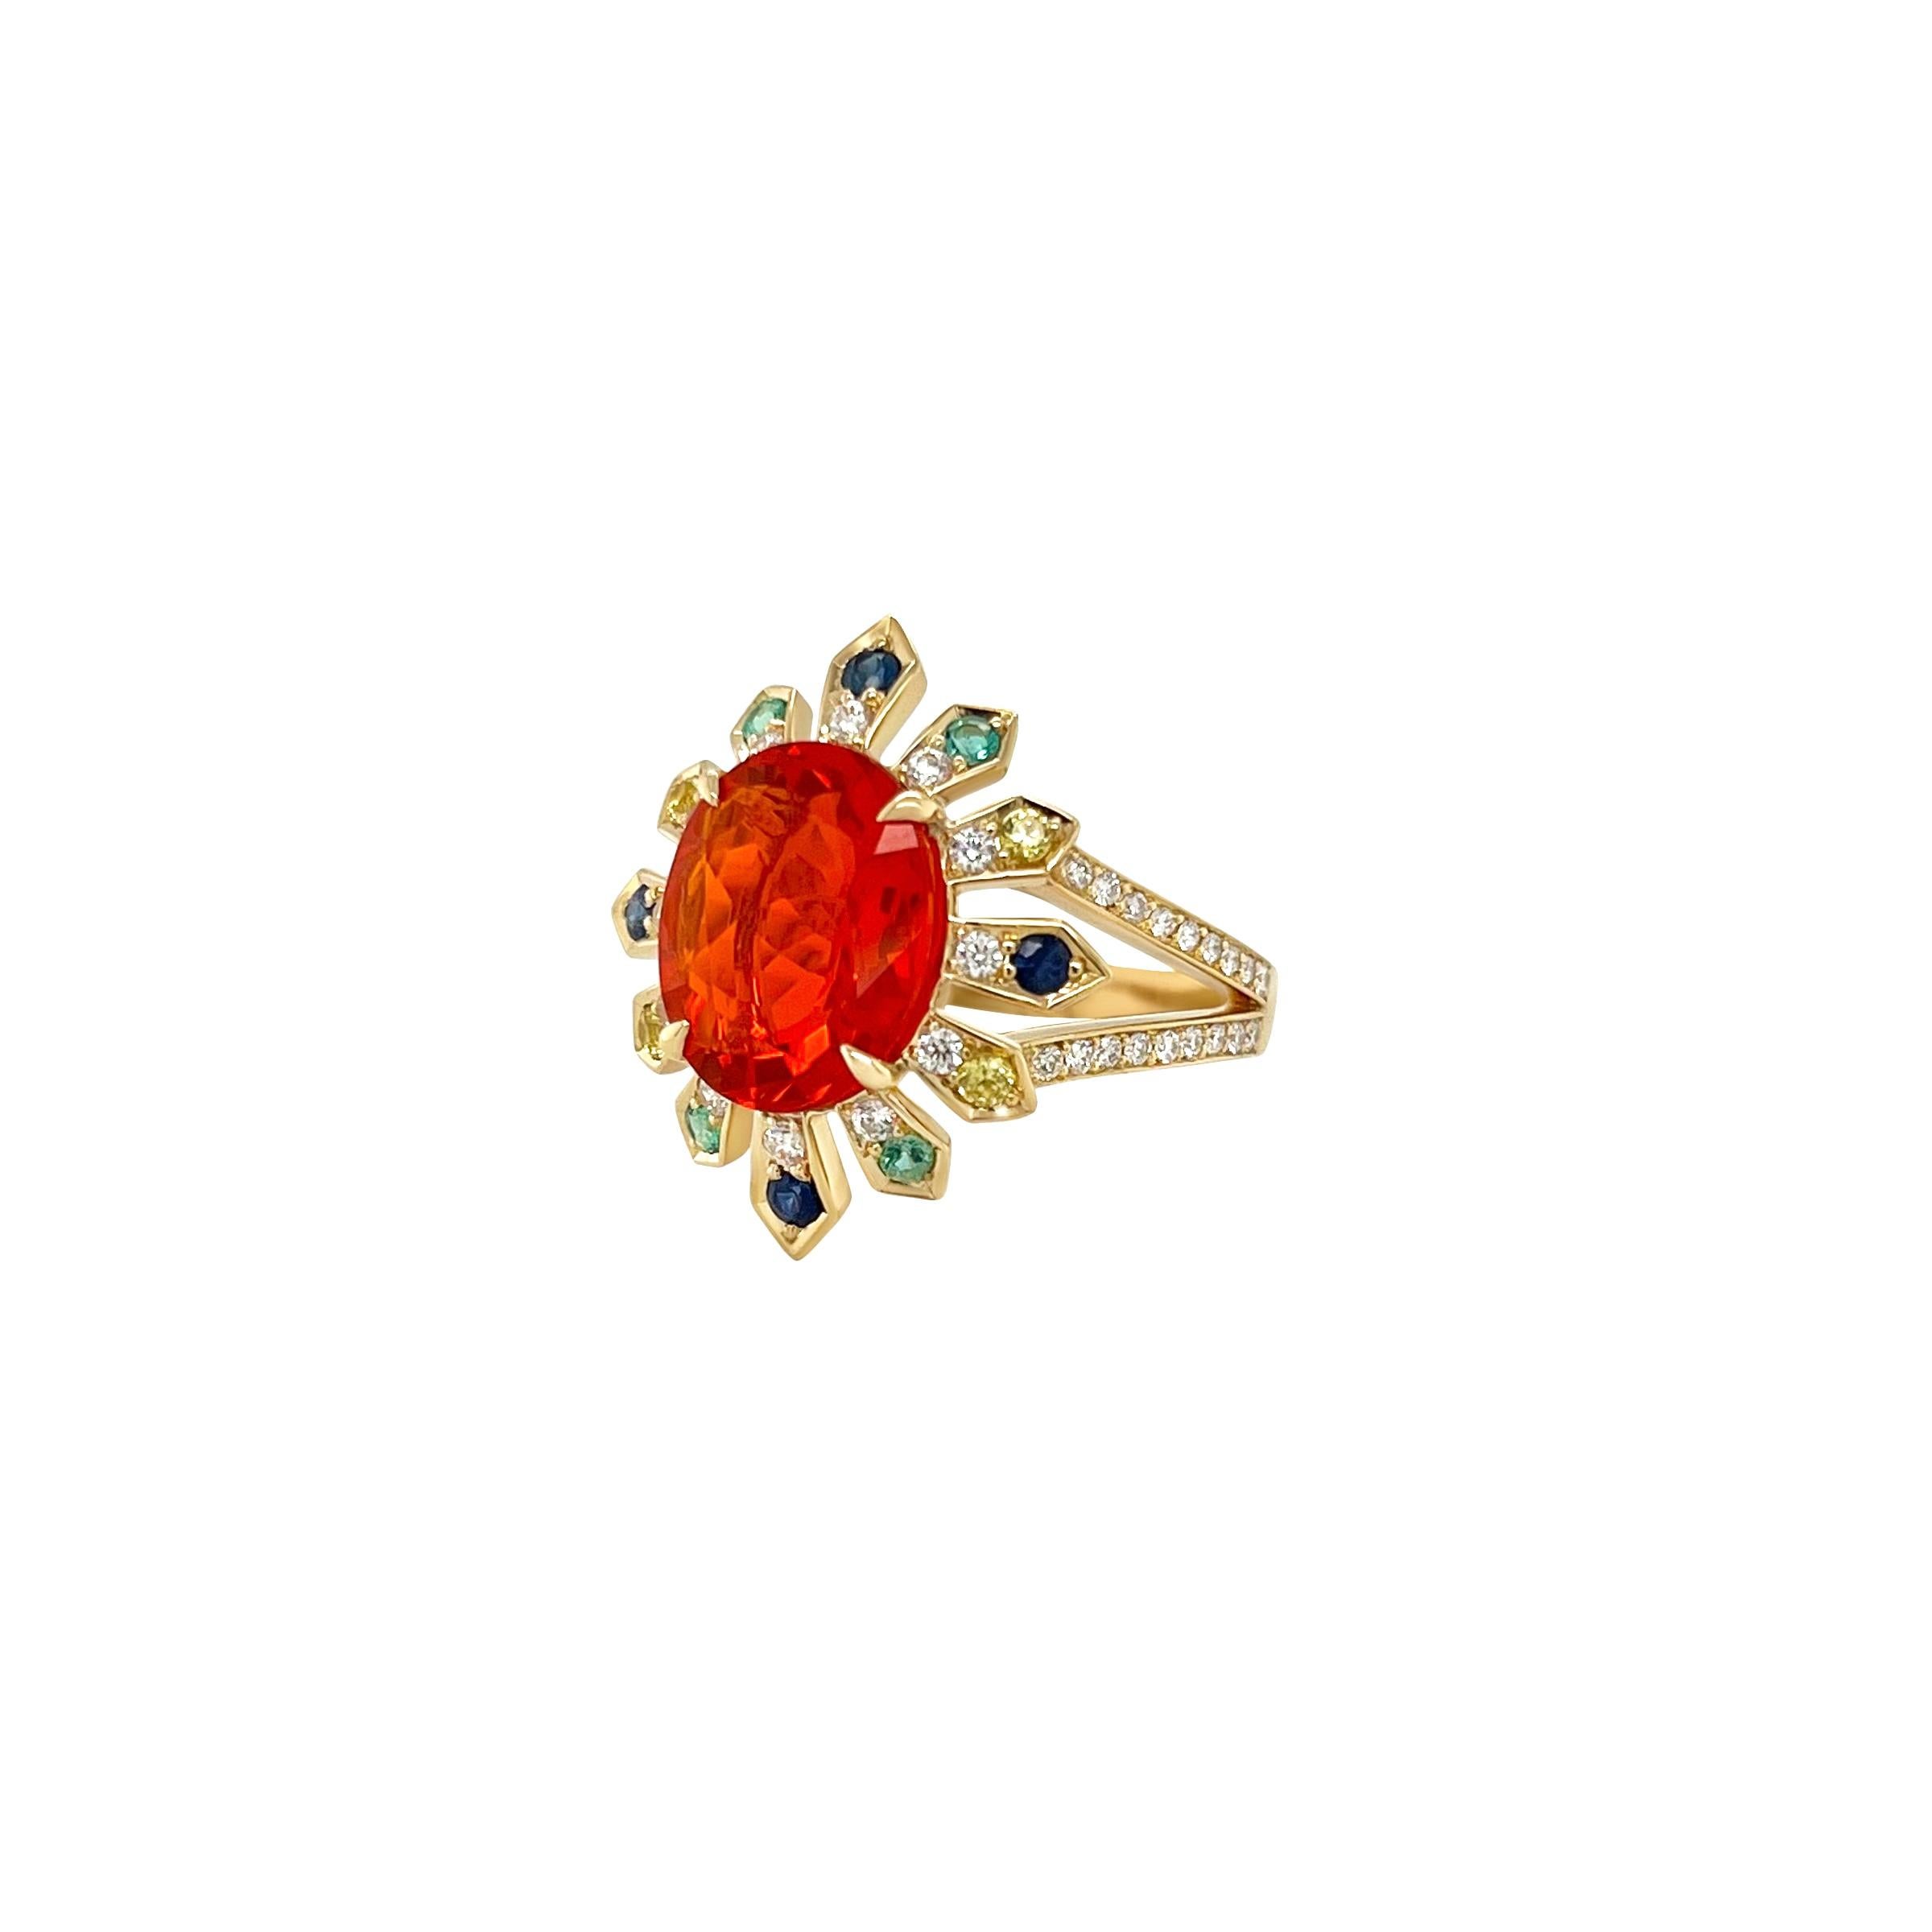 Mexican Fire Opals are renowned for their vibrant and intense color. This 3ct gemstone is natural and not treated showcasing the best fiery orange and red with beautiful transparency. This one of a kind item was inspired by South American colors